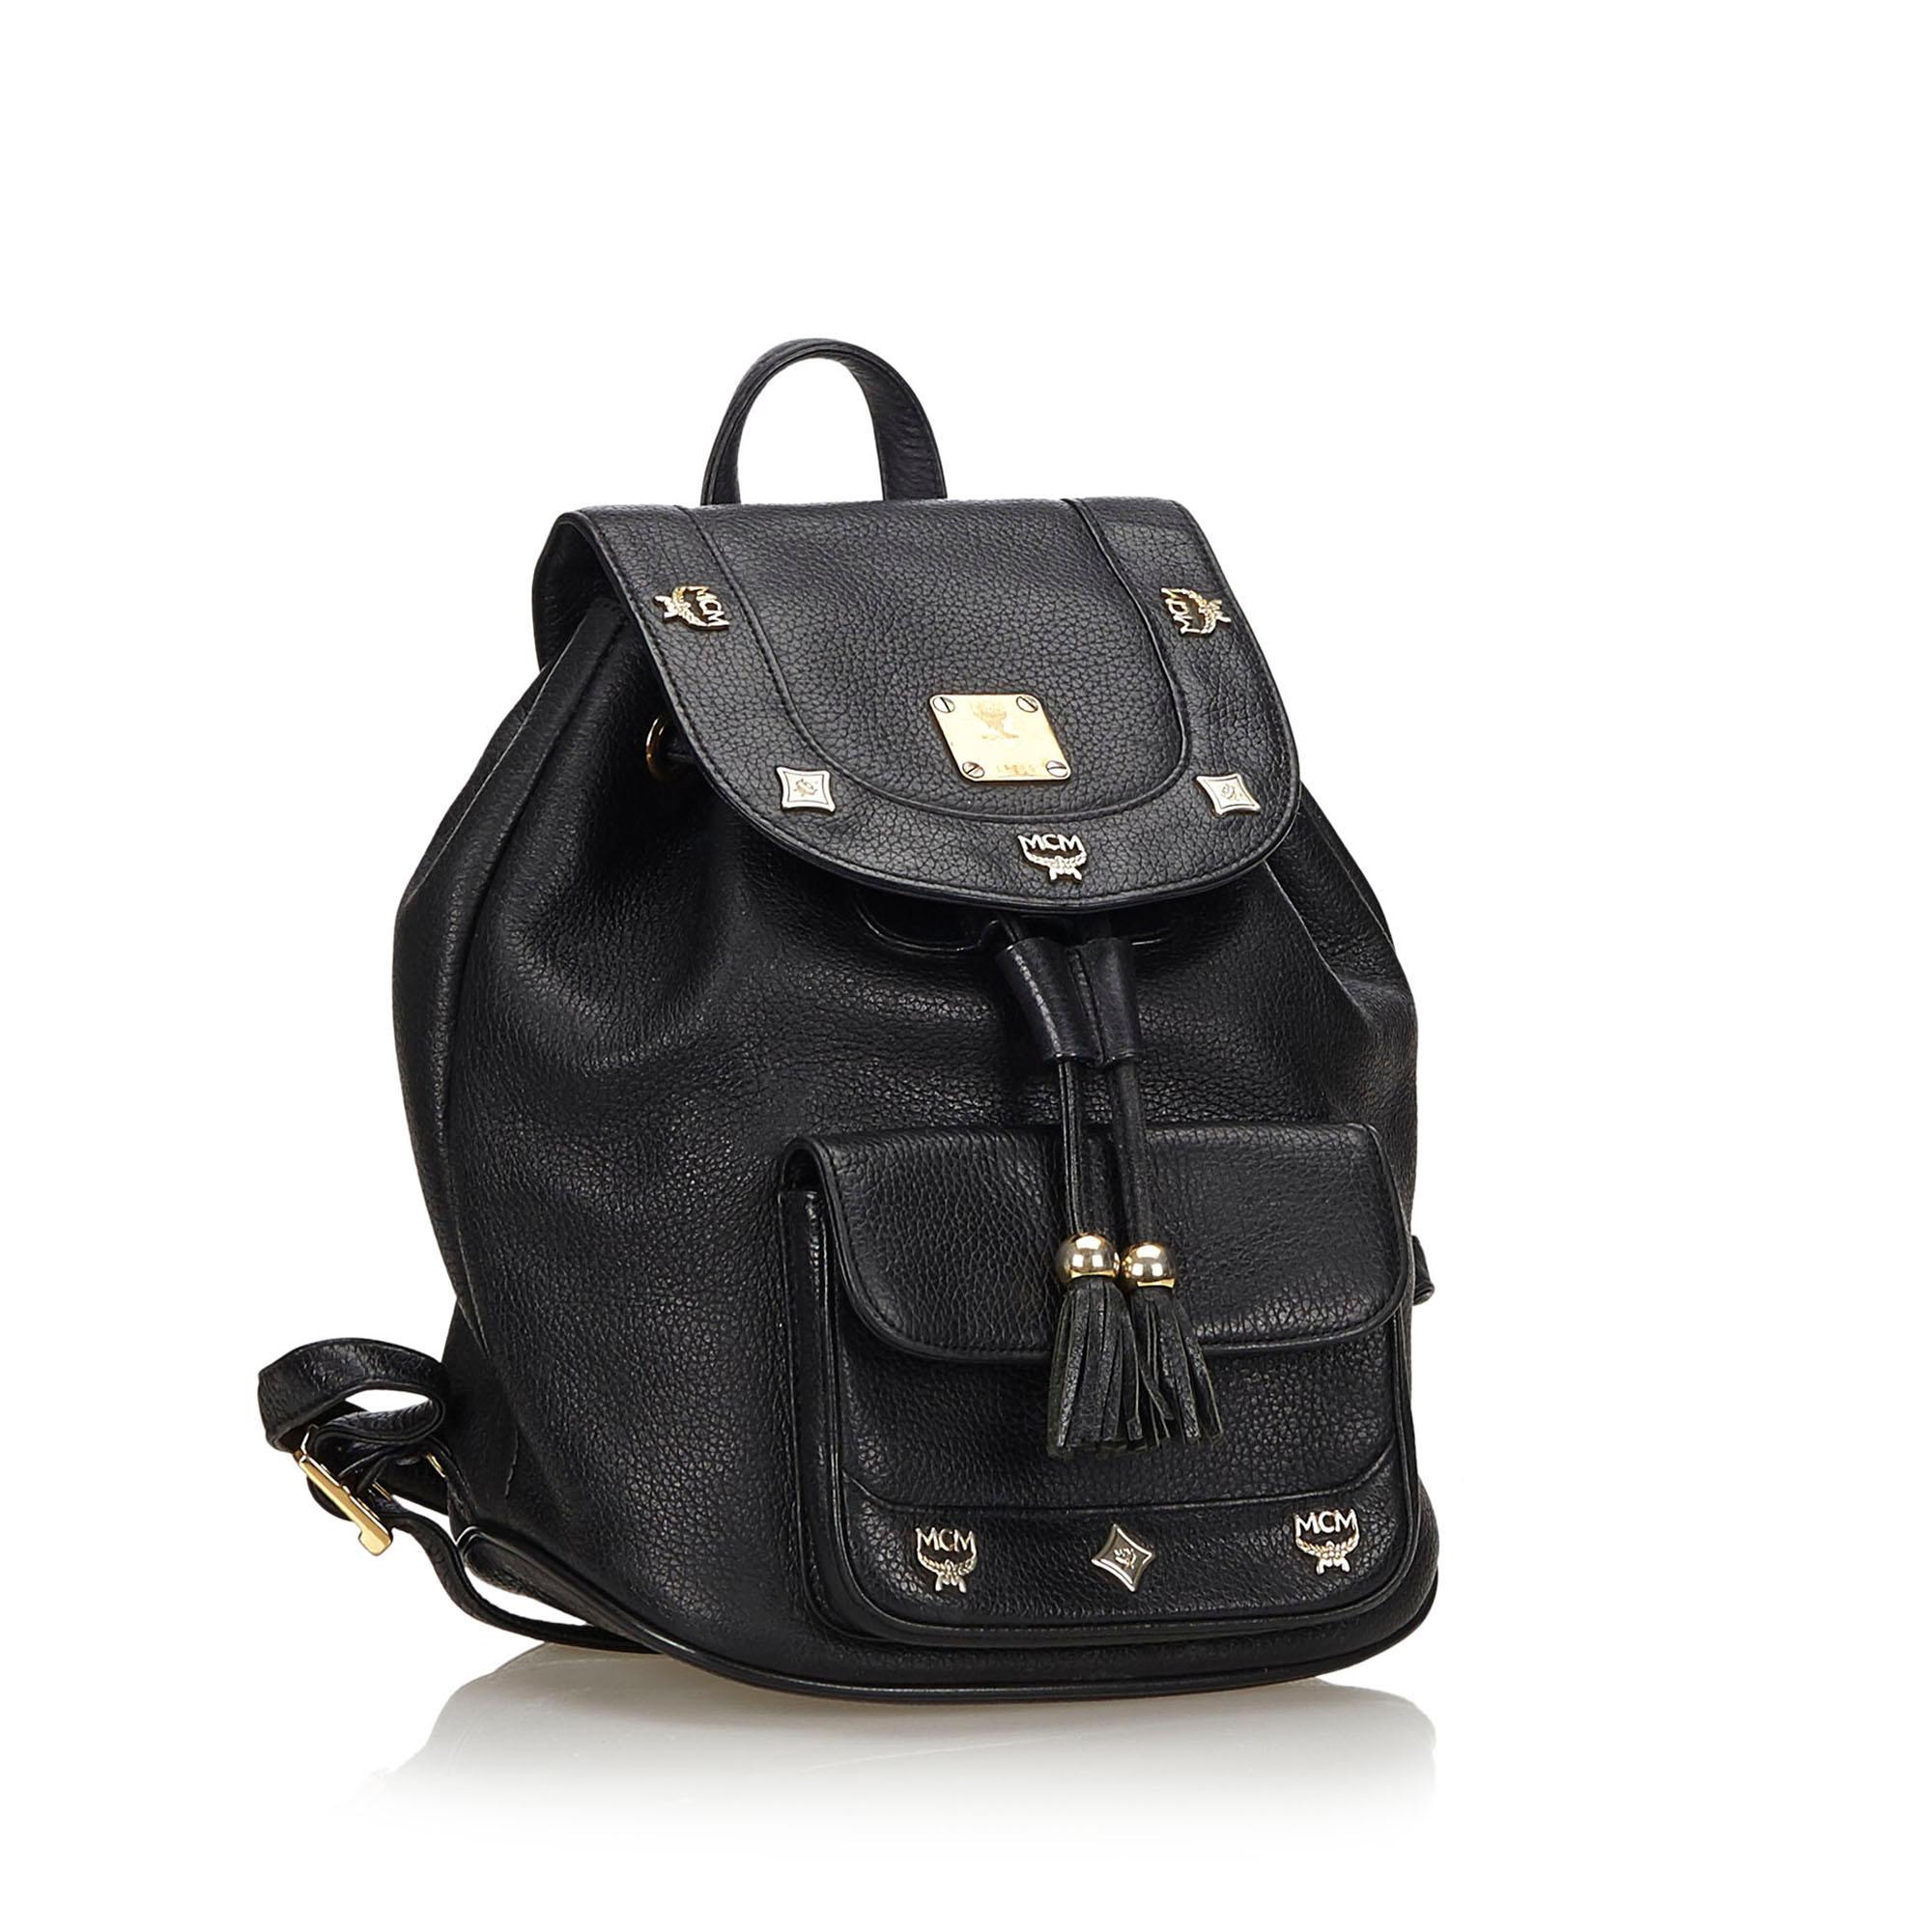 This backpack features a leather body, exterior front flap pocket, flat leather back straps, flap top with drawstring closure, and interior zip pocket. It carries as B+ condition rating.

Inclusions: 
Authenticity Card
Dimensions:
Length: 22.00